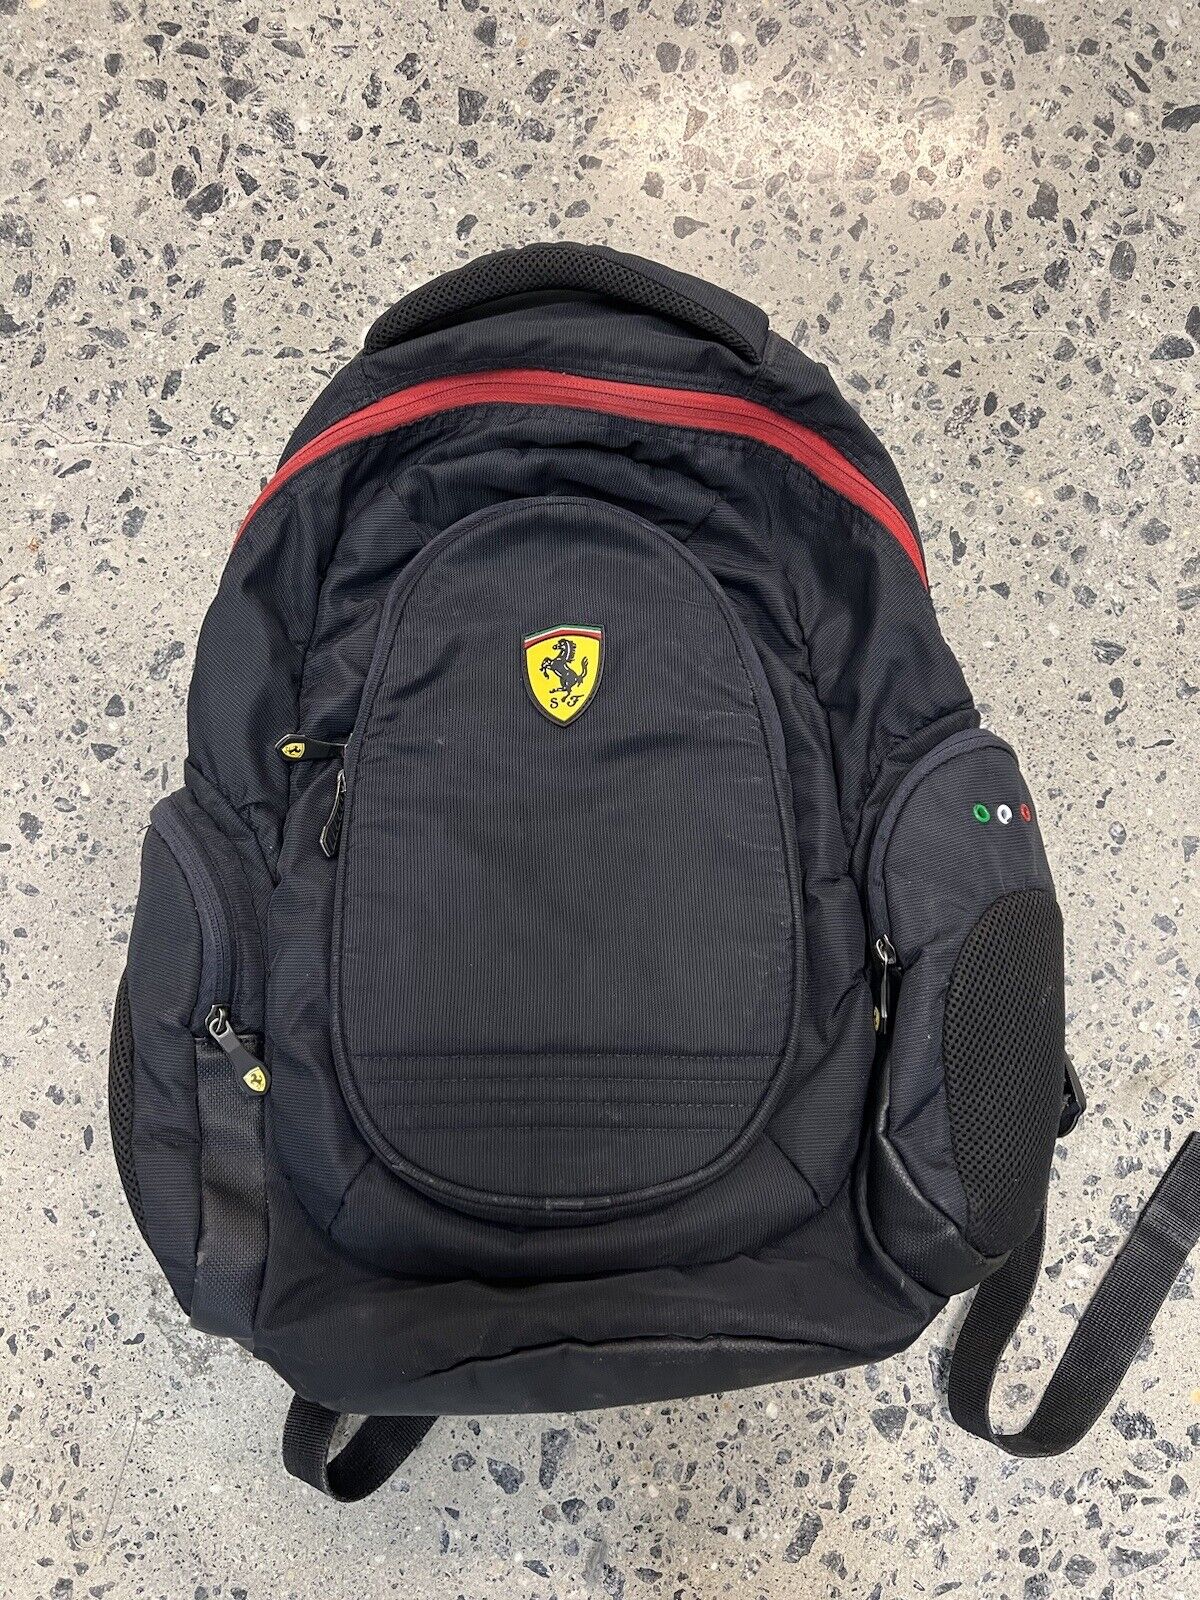 Authentic FERRARI Laptop Sports Gym Luggage Backpack / RARE / Collector’s Item